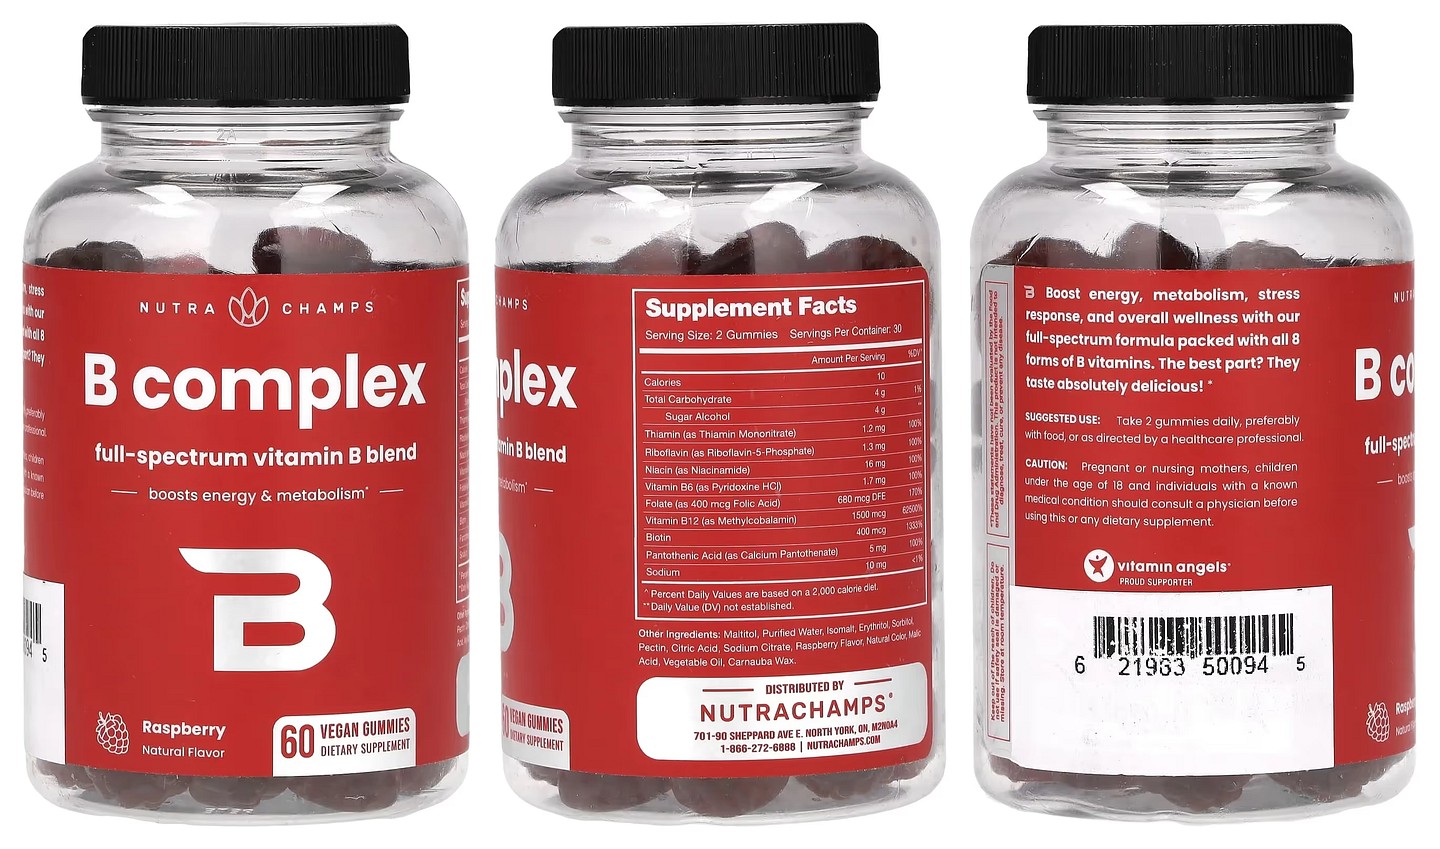 NutraChamps, B Complex packaging